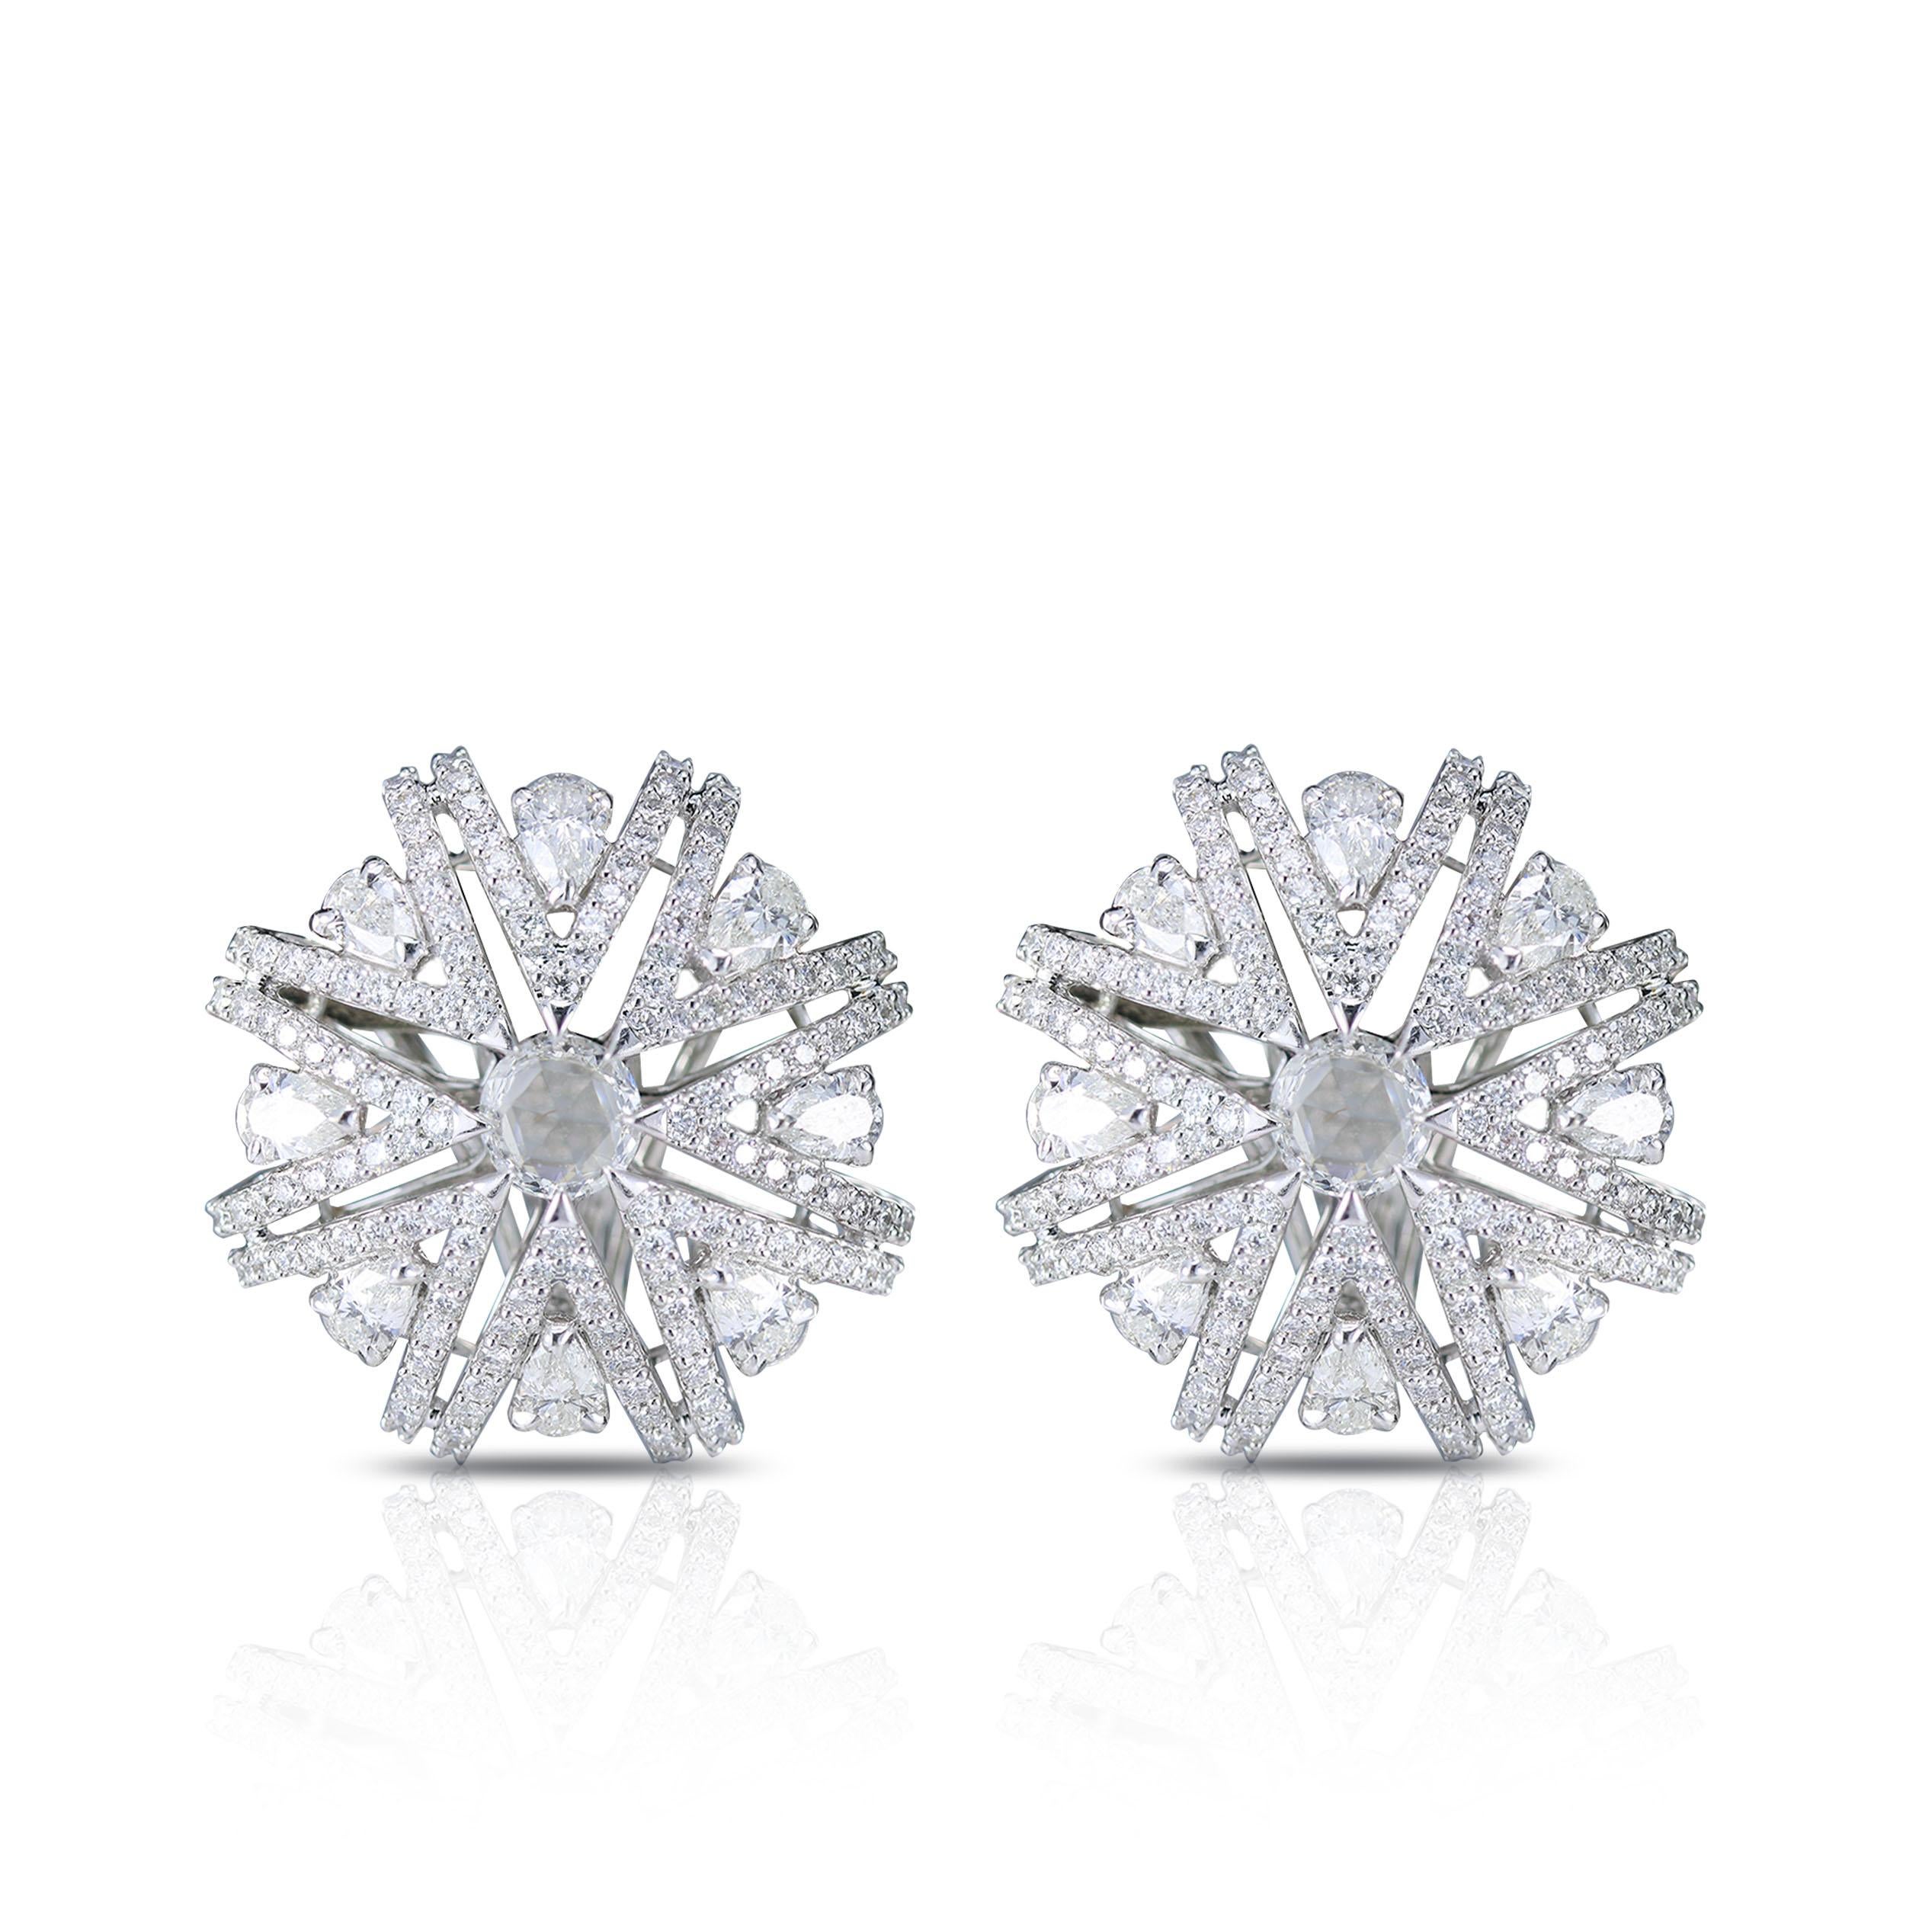 18K white gold and diamond Stud Earrings

Delicate and intricate like a snowflake, this 18K white gold stud earrings is frosted with round and pear brilliant cut and round rosecut diamonds in a prong setting. A standout addition to your festive